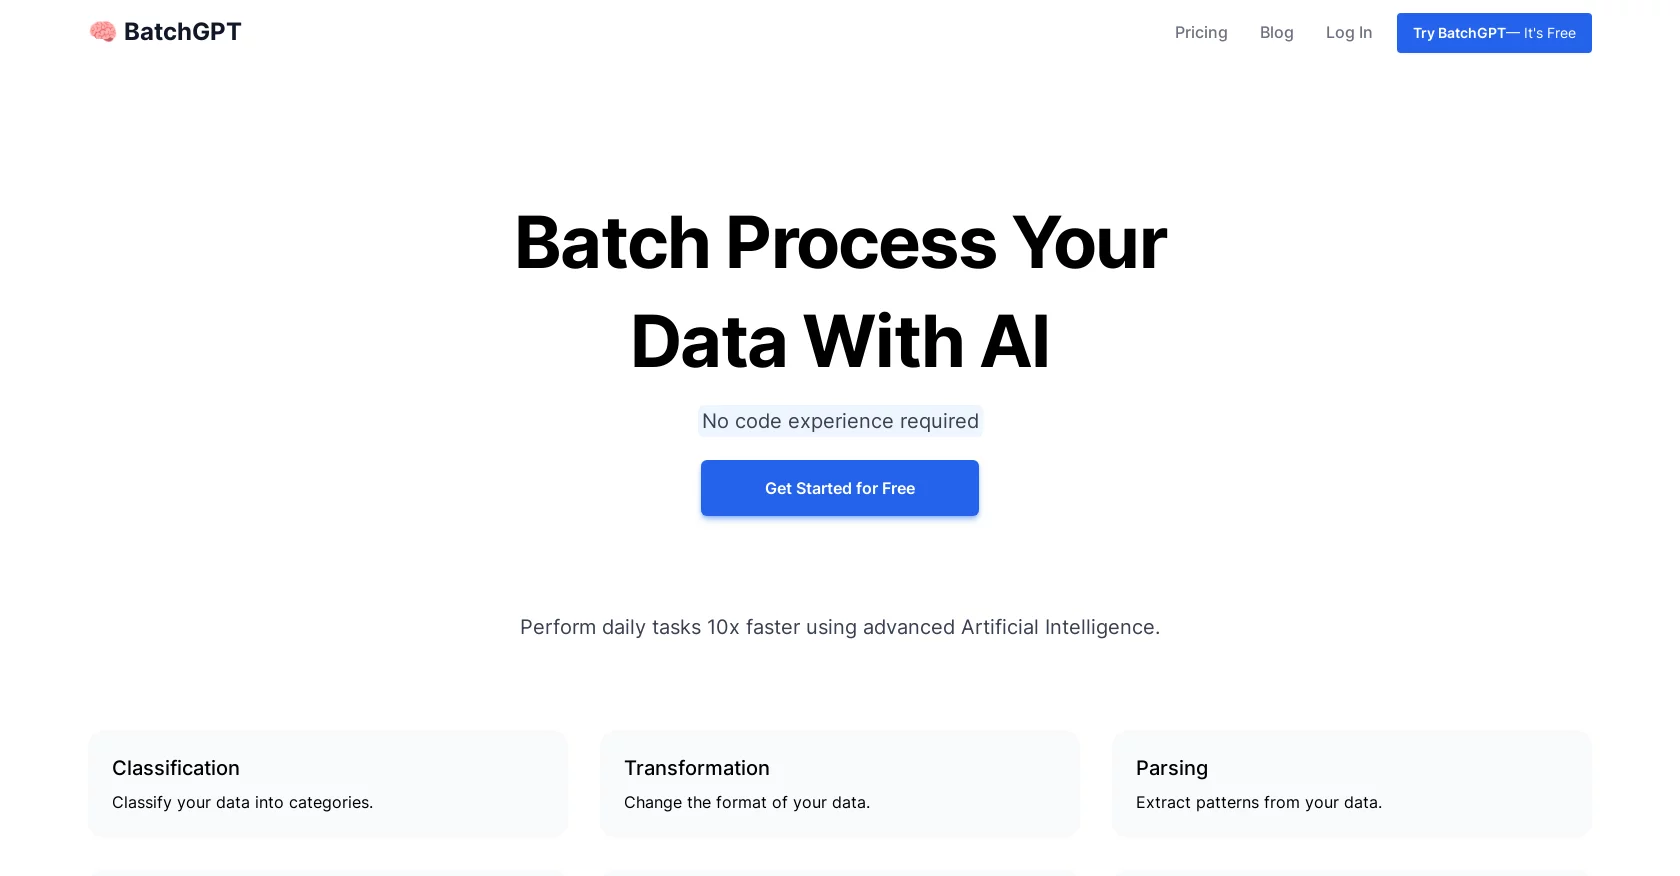  Batch Process Your Data With AI